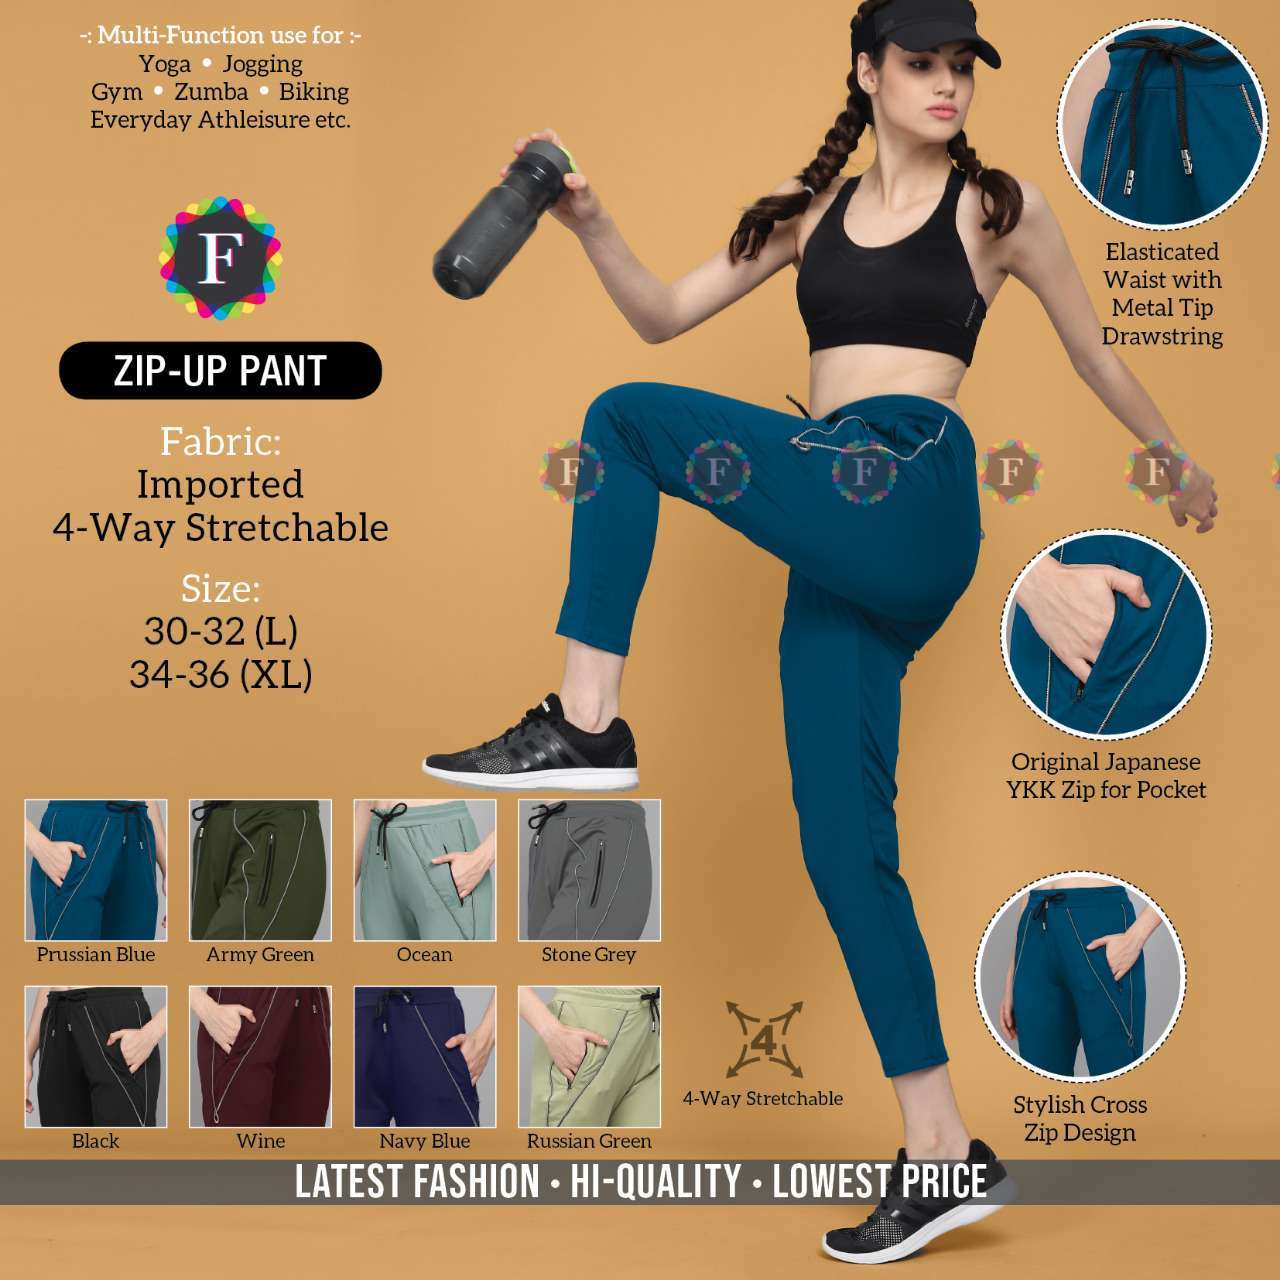 zip up pant multi function yoga jogging gym zumba pant collection